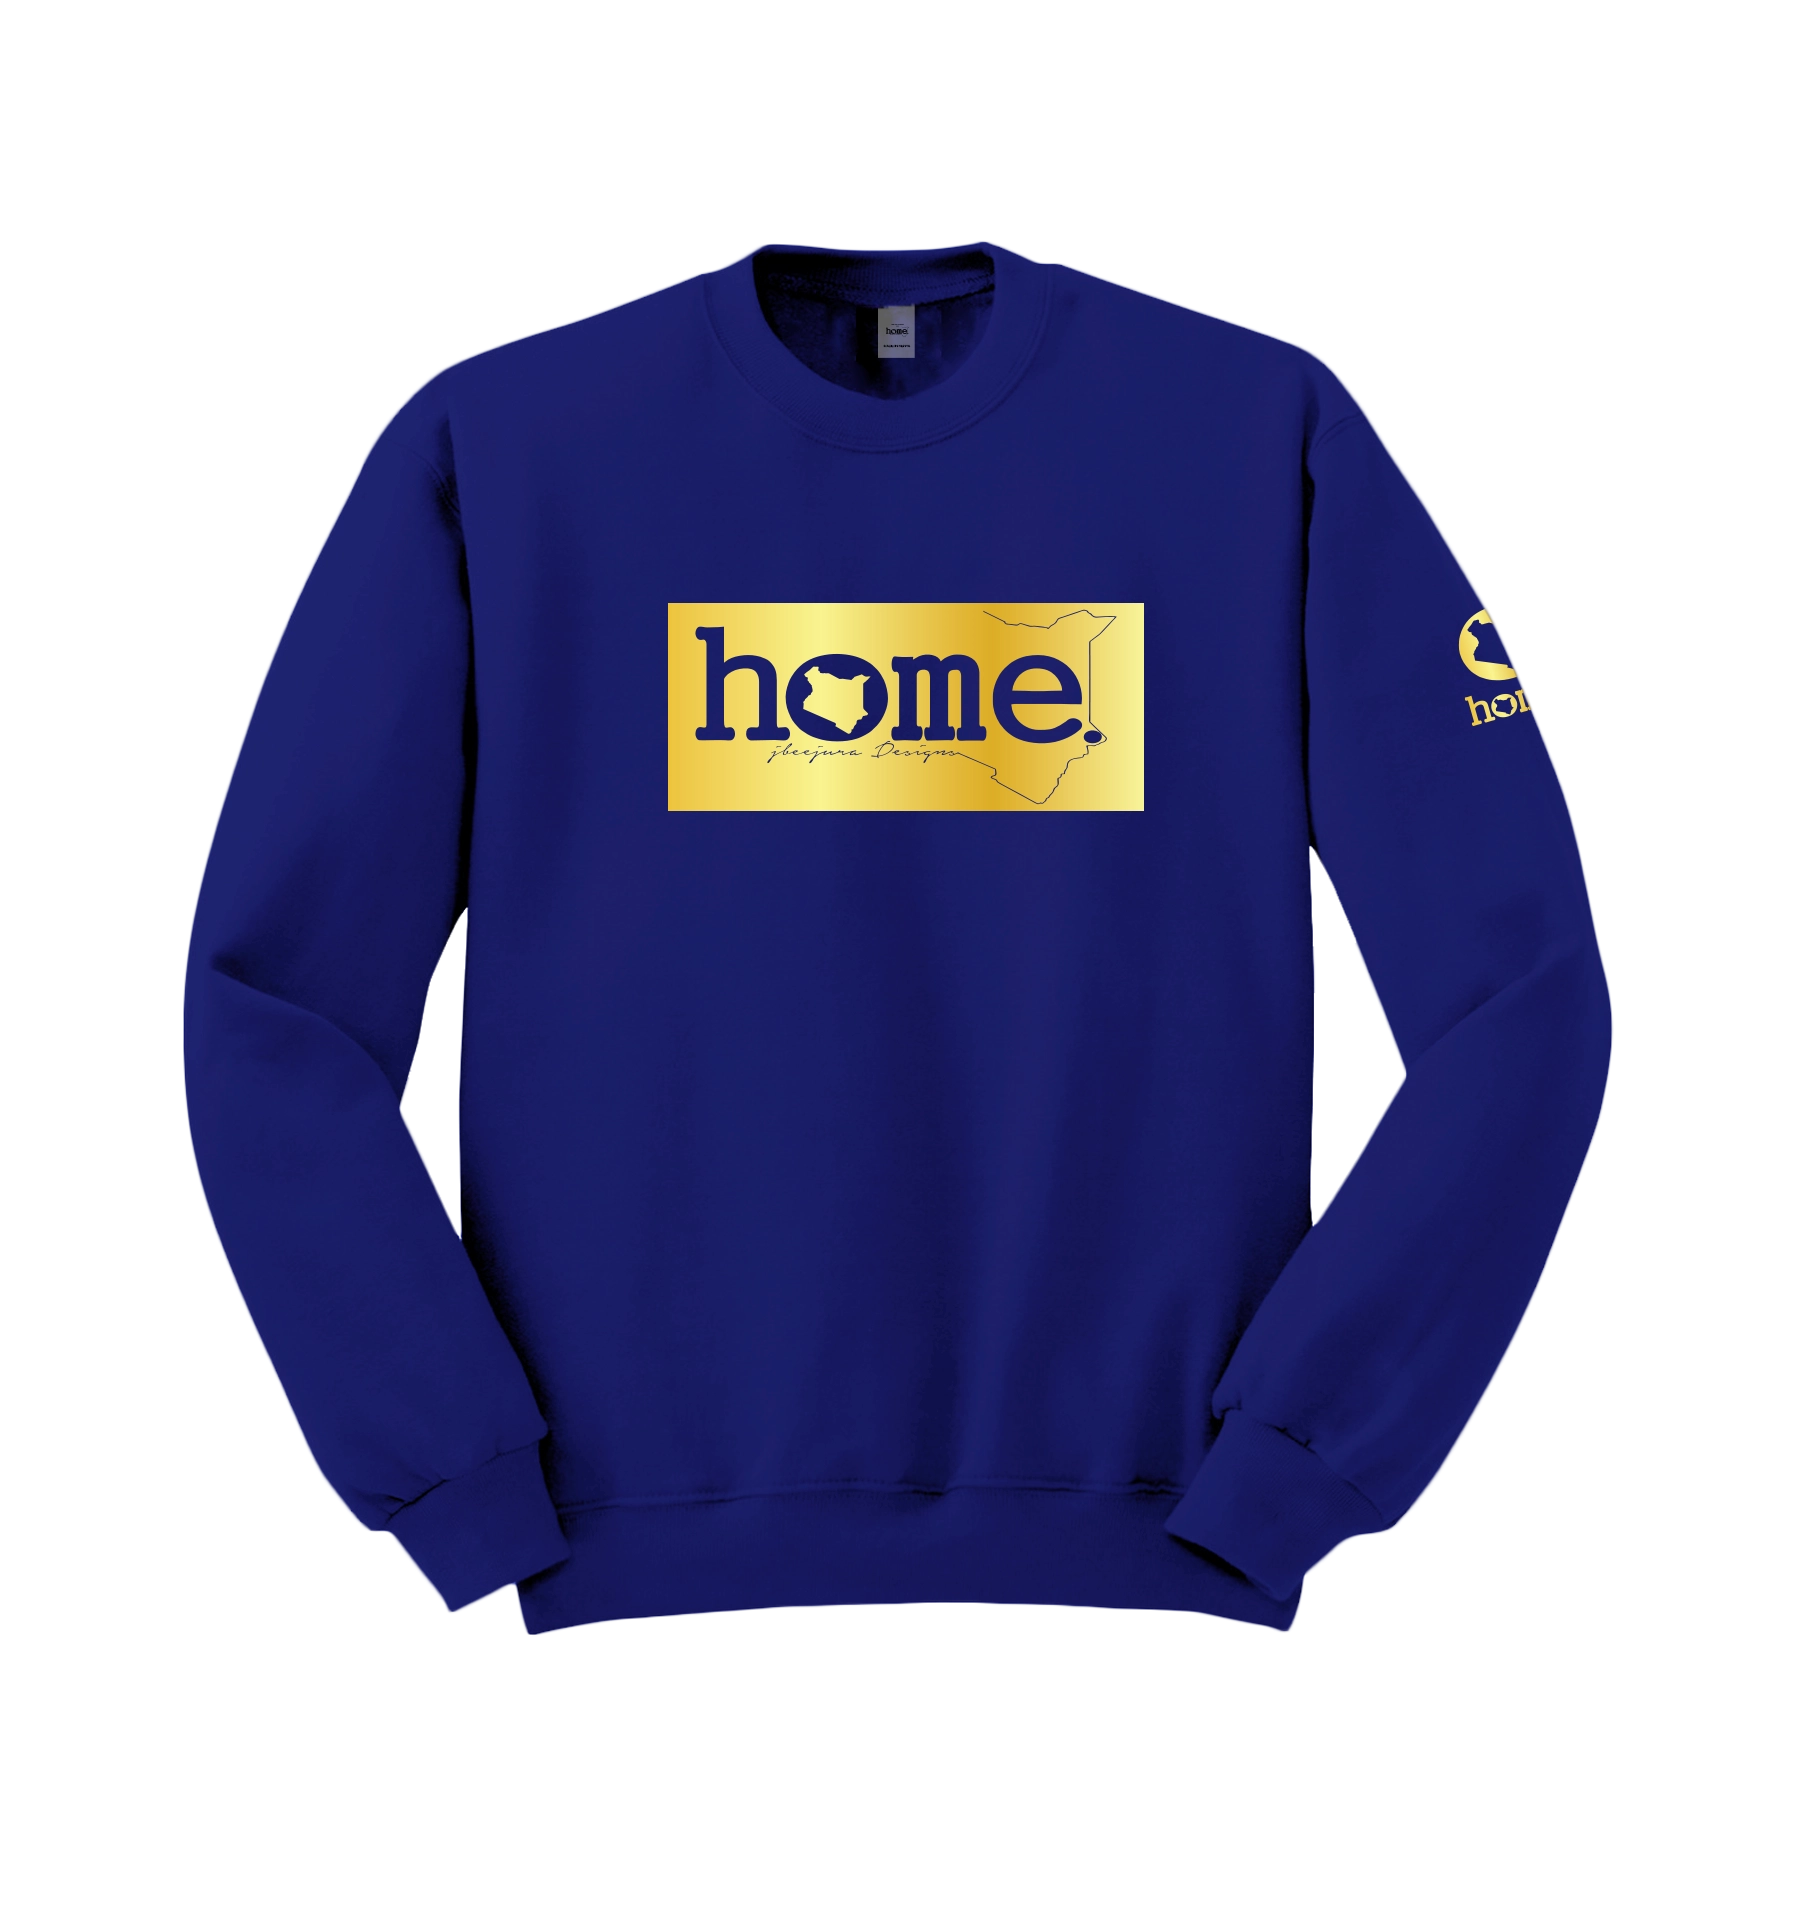 home_254 ROYAL BLUE SWEATSHIRT (HEAVY FABRIC) WITH A GOLD CLASSIC PRINT